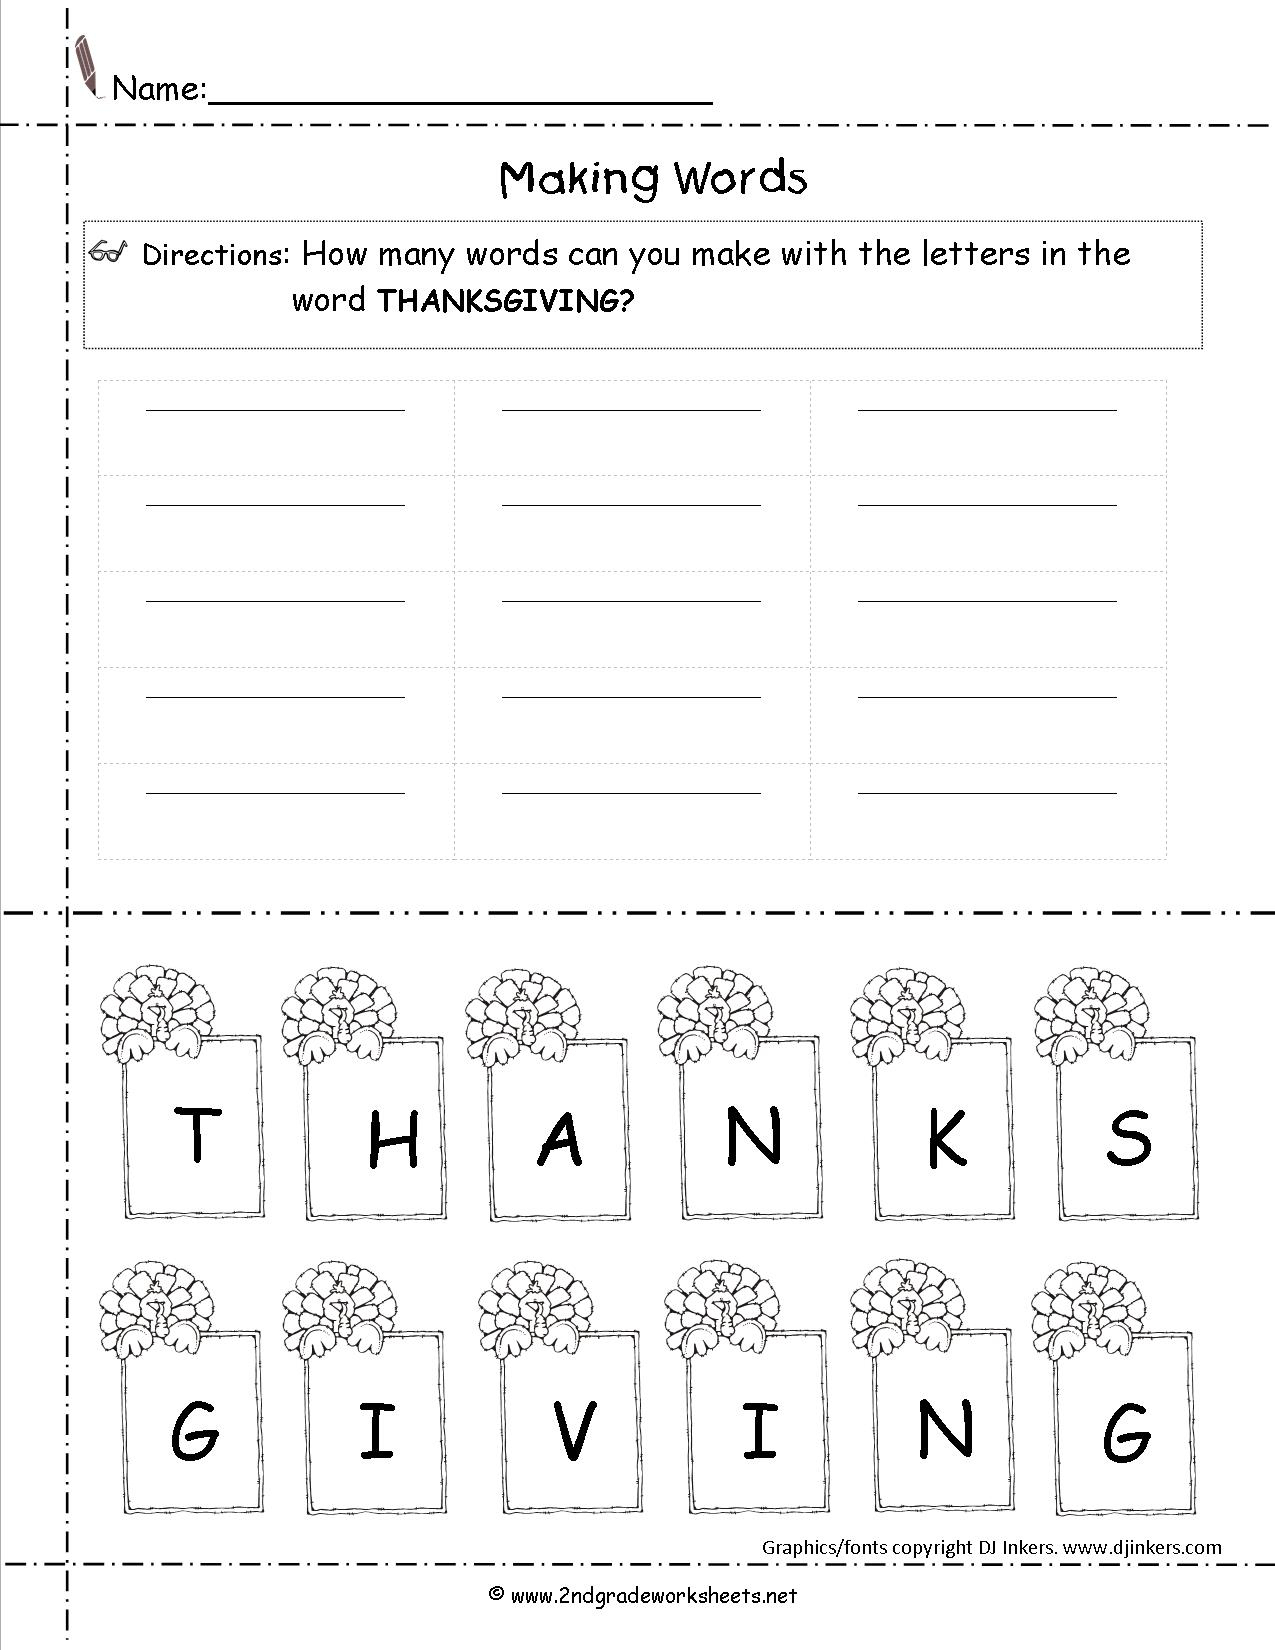 Thanksgiving Printouts And Worksheets - Free Printable Thanksgiving | Free Printable Thanksgiving Worksheets